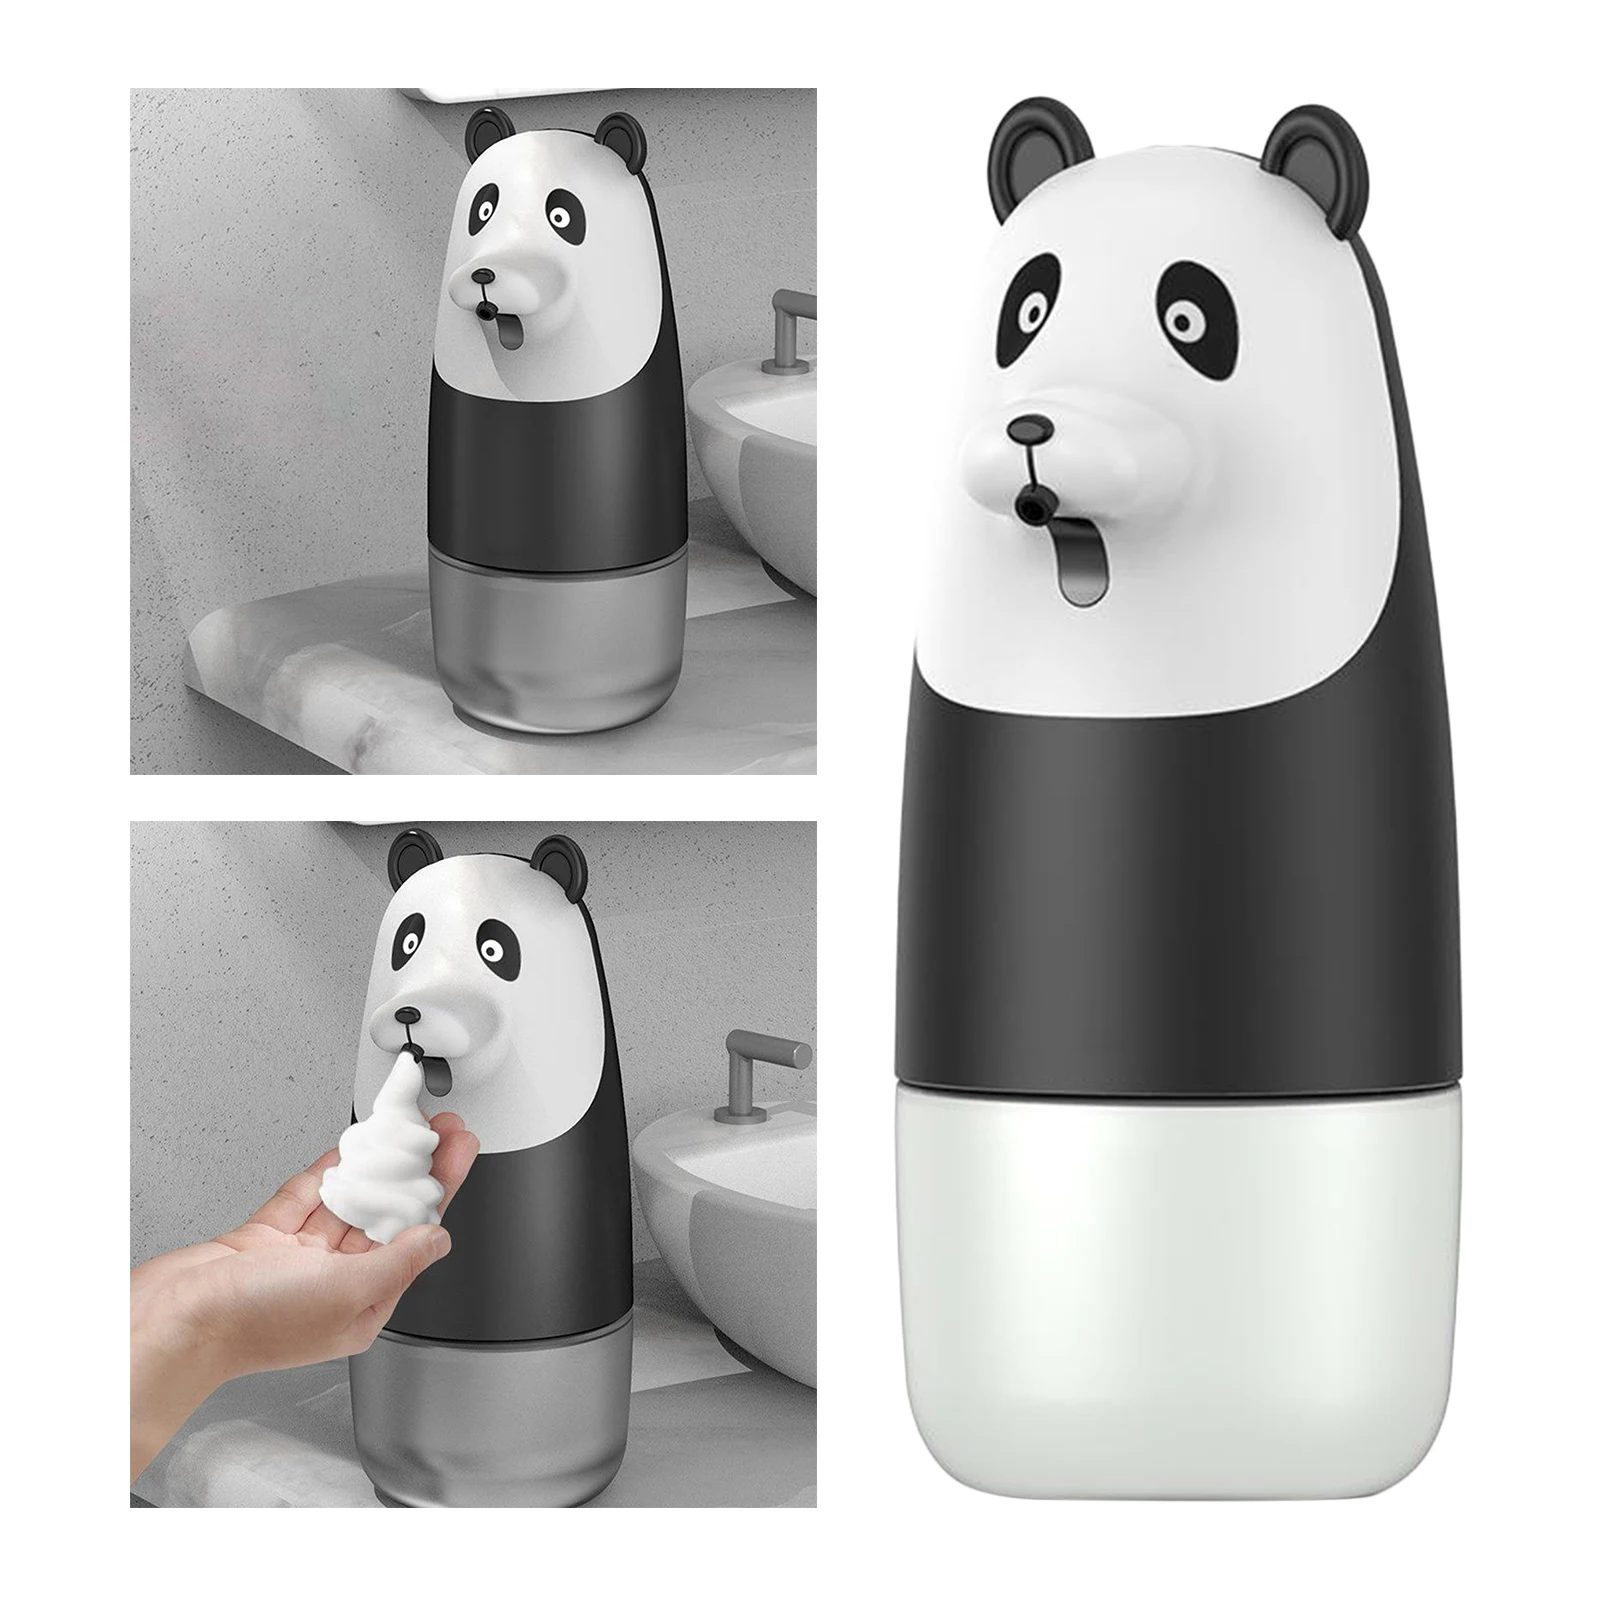 

280ml Cute Cartoon Panda Touchless Automatic Soap Dispenser Infrared Auto Foaming Dispensers Hand Washing for Bathroom Kitchen